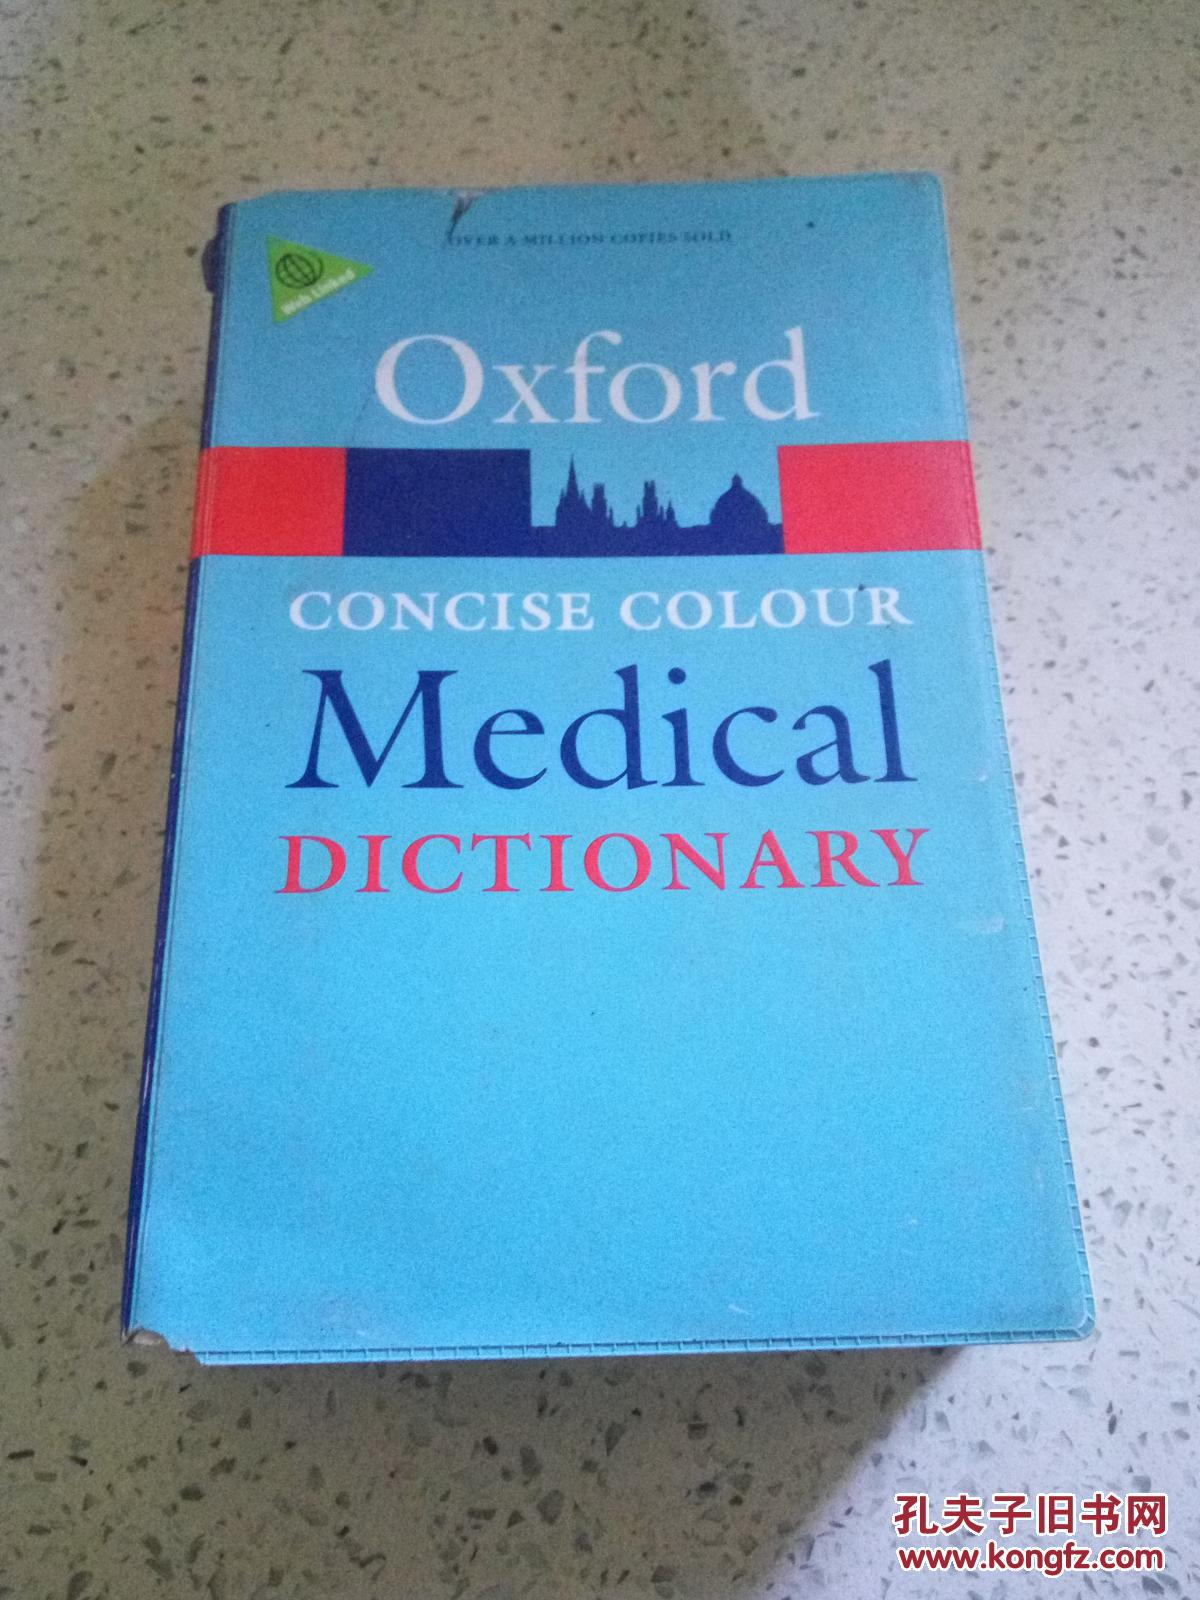 oxford concise colour medical dictionary